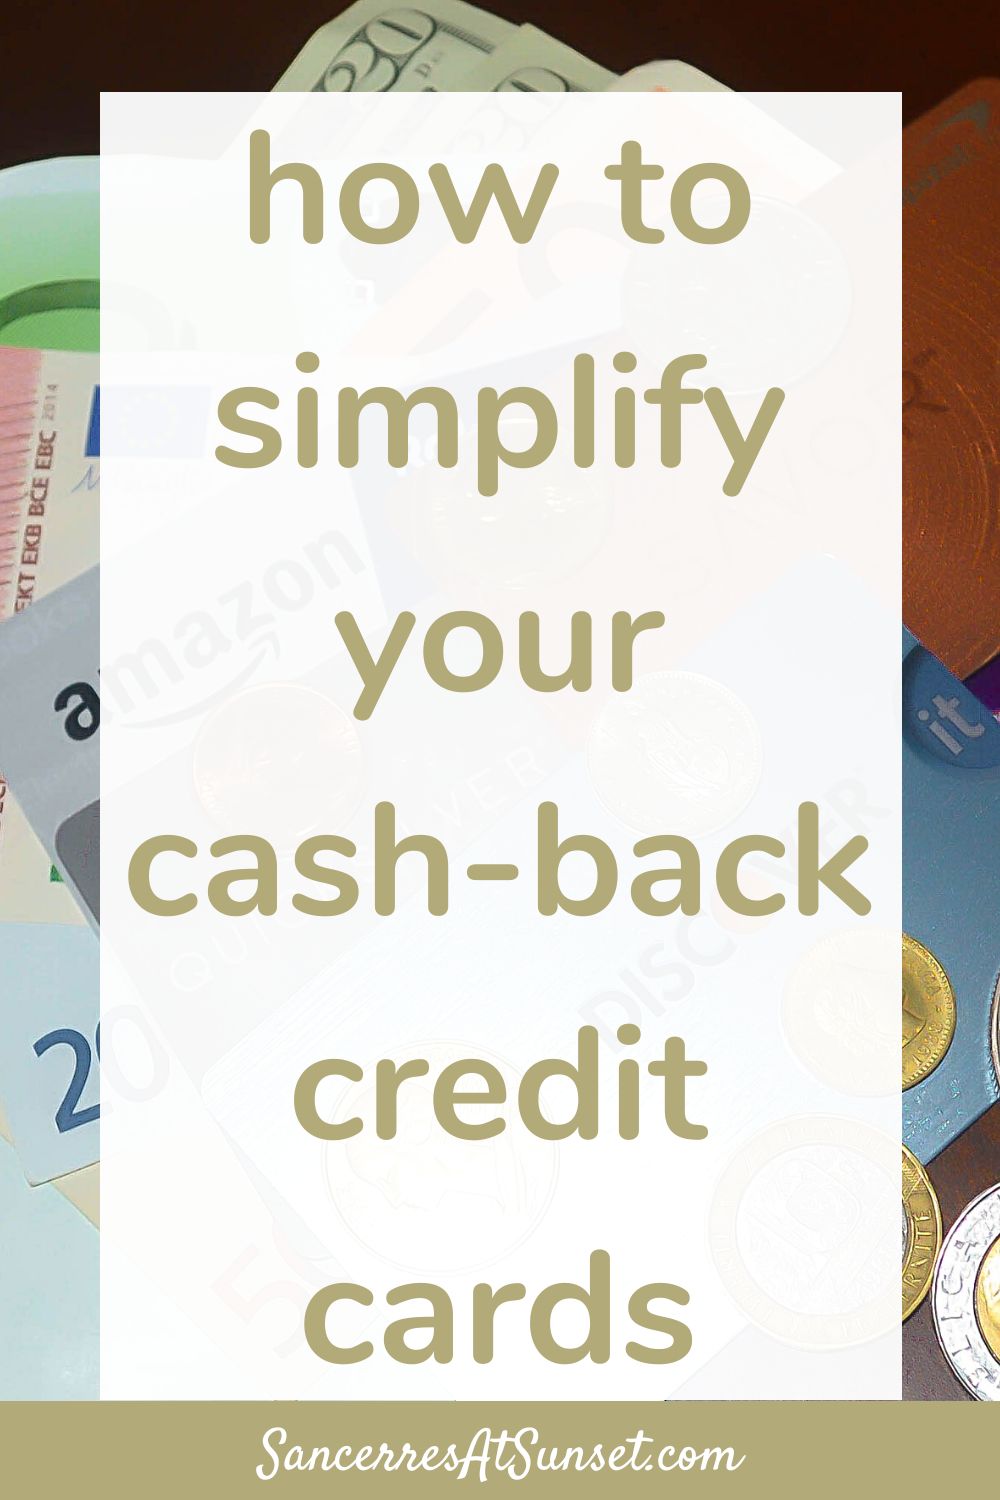 How to Simplify Your Cash-Back Credit Cards